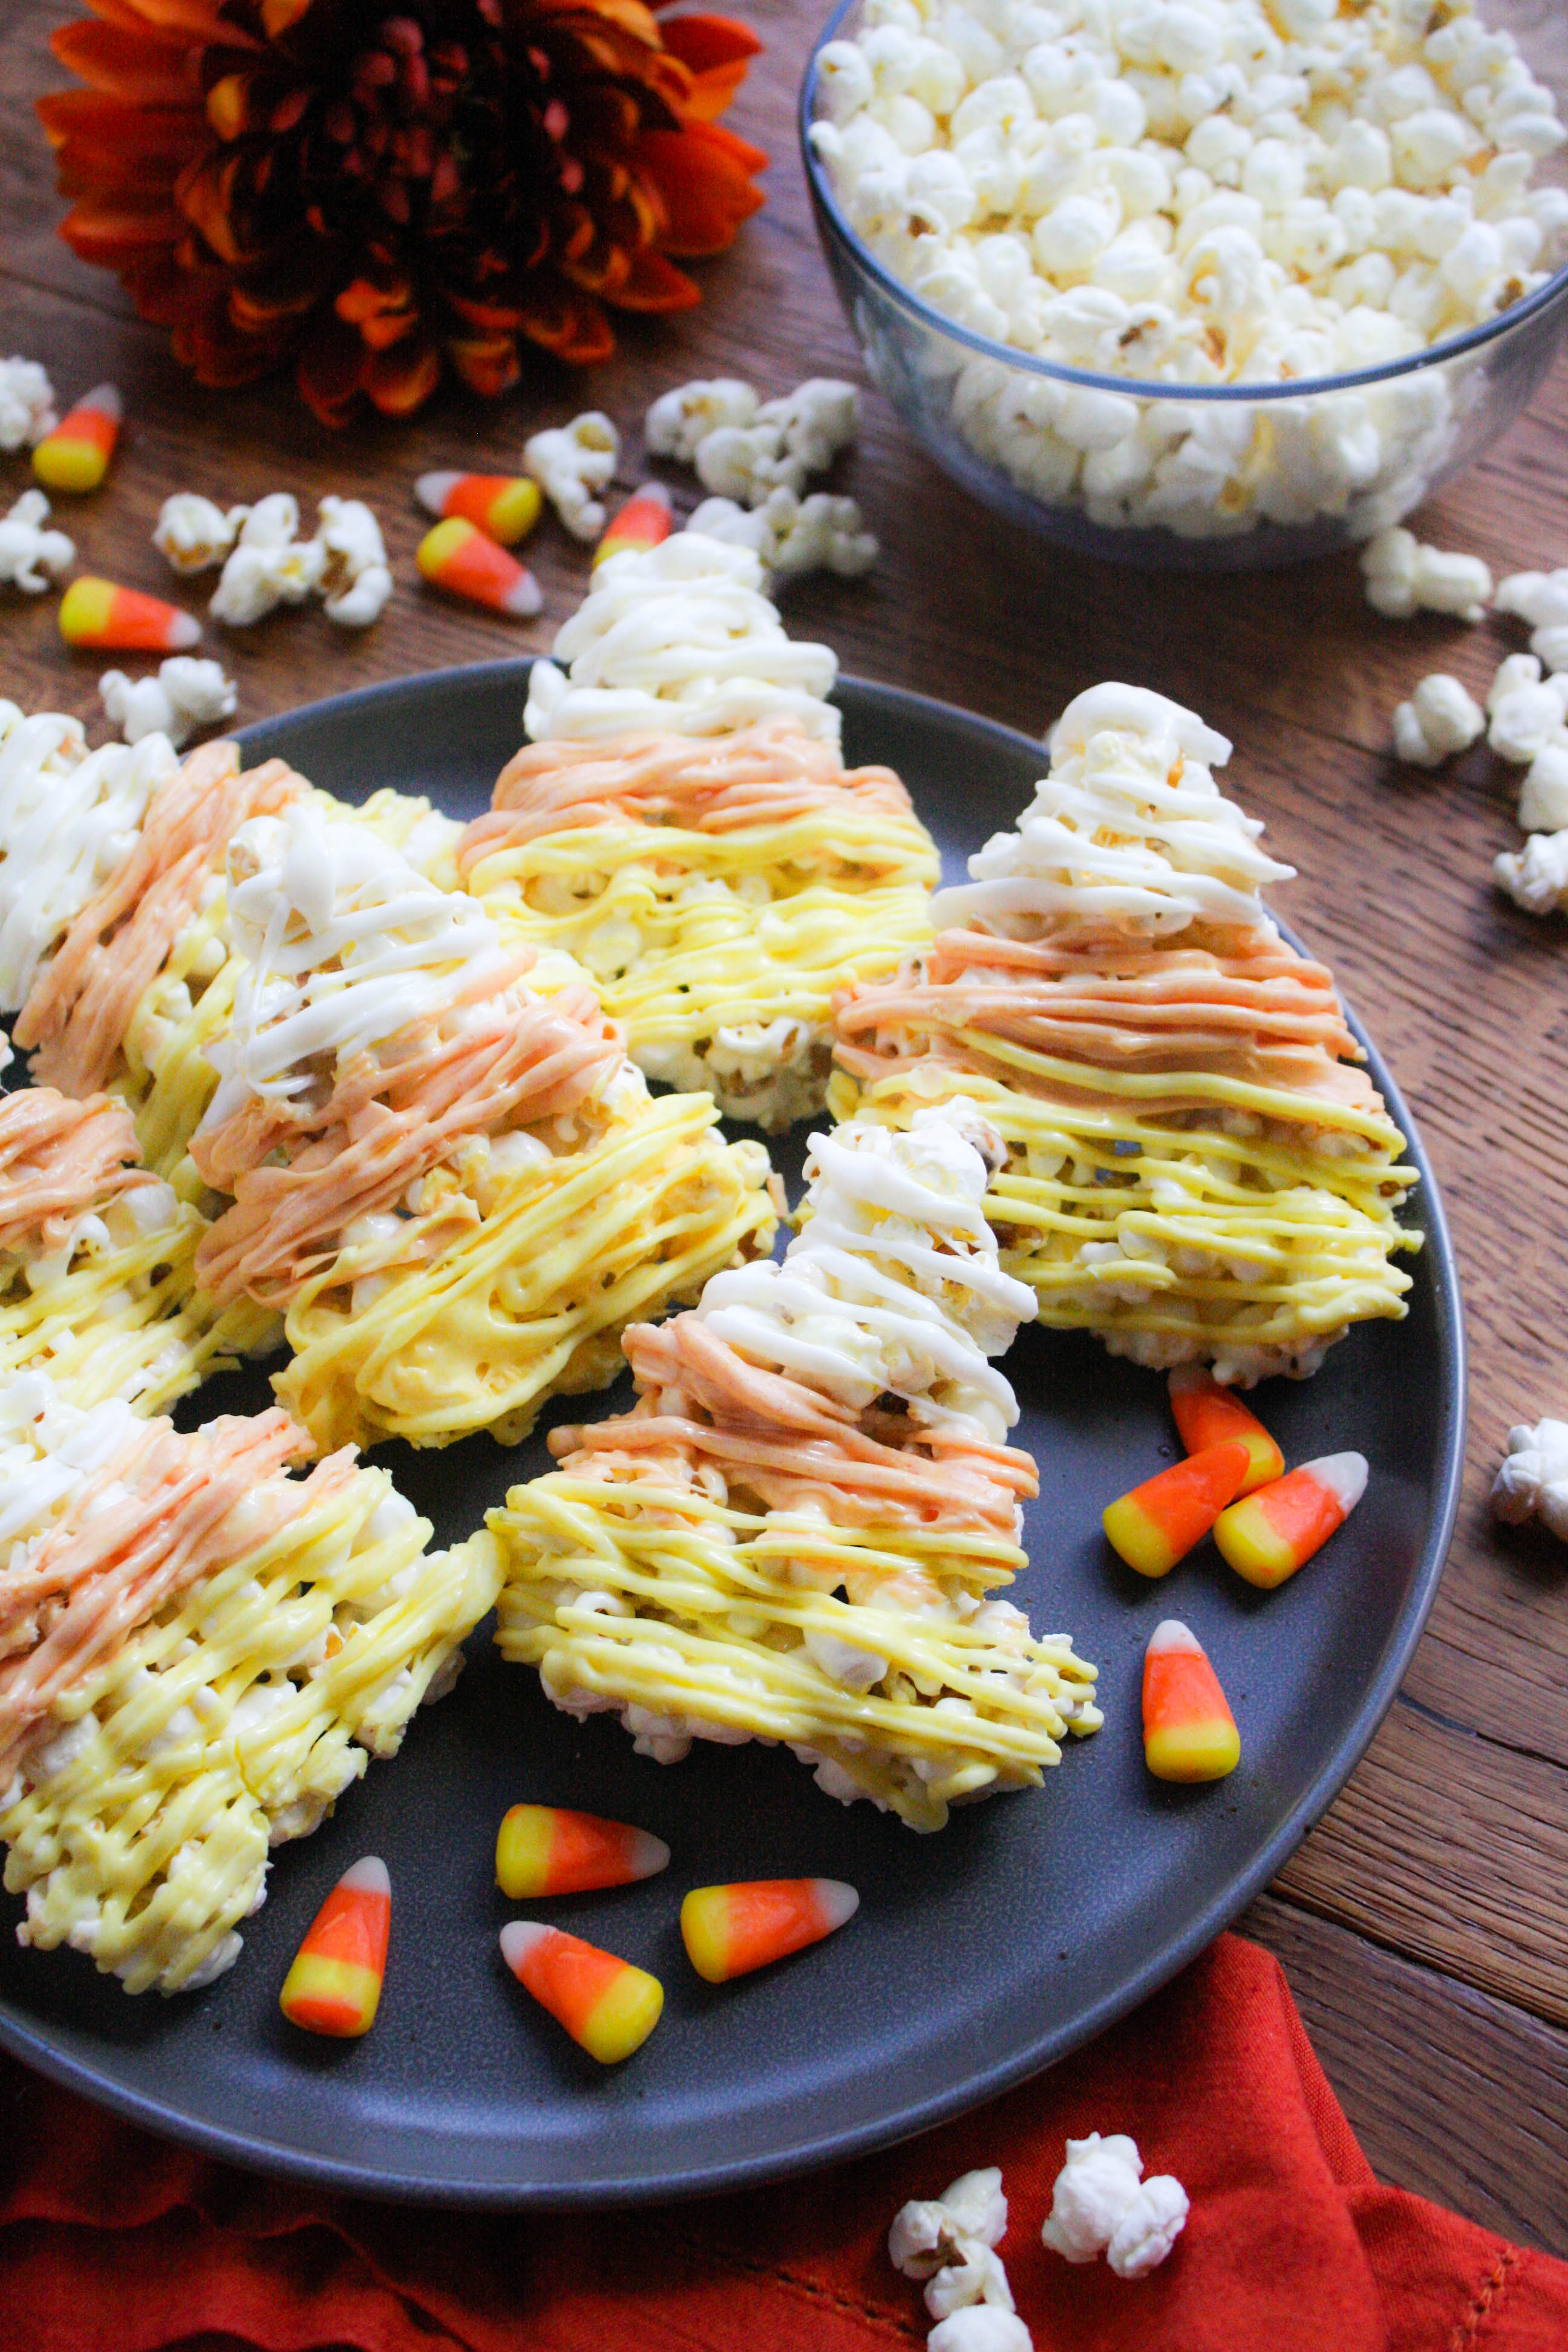 Candy Corn-Shaped Popcorn Balls are a fabulous Halloween treat! You'll love these Candy Corn-Shaped Popcorn Balls for festive fun treats!